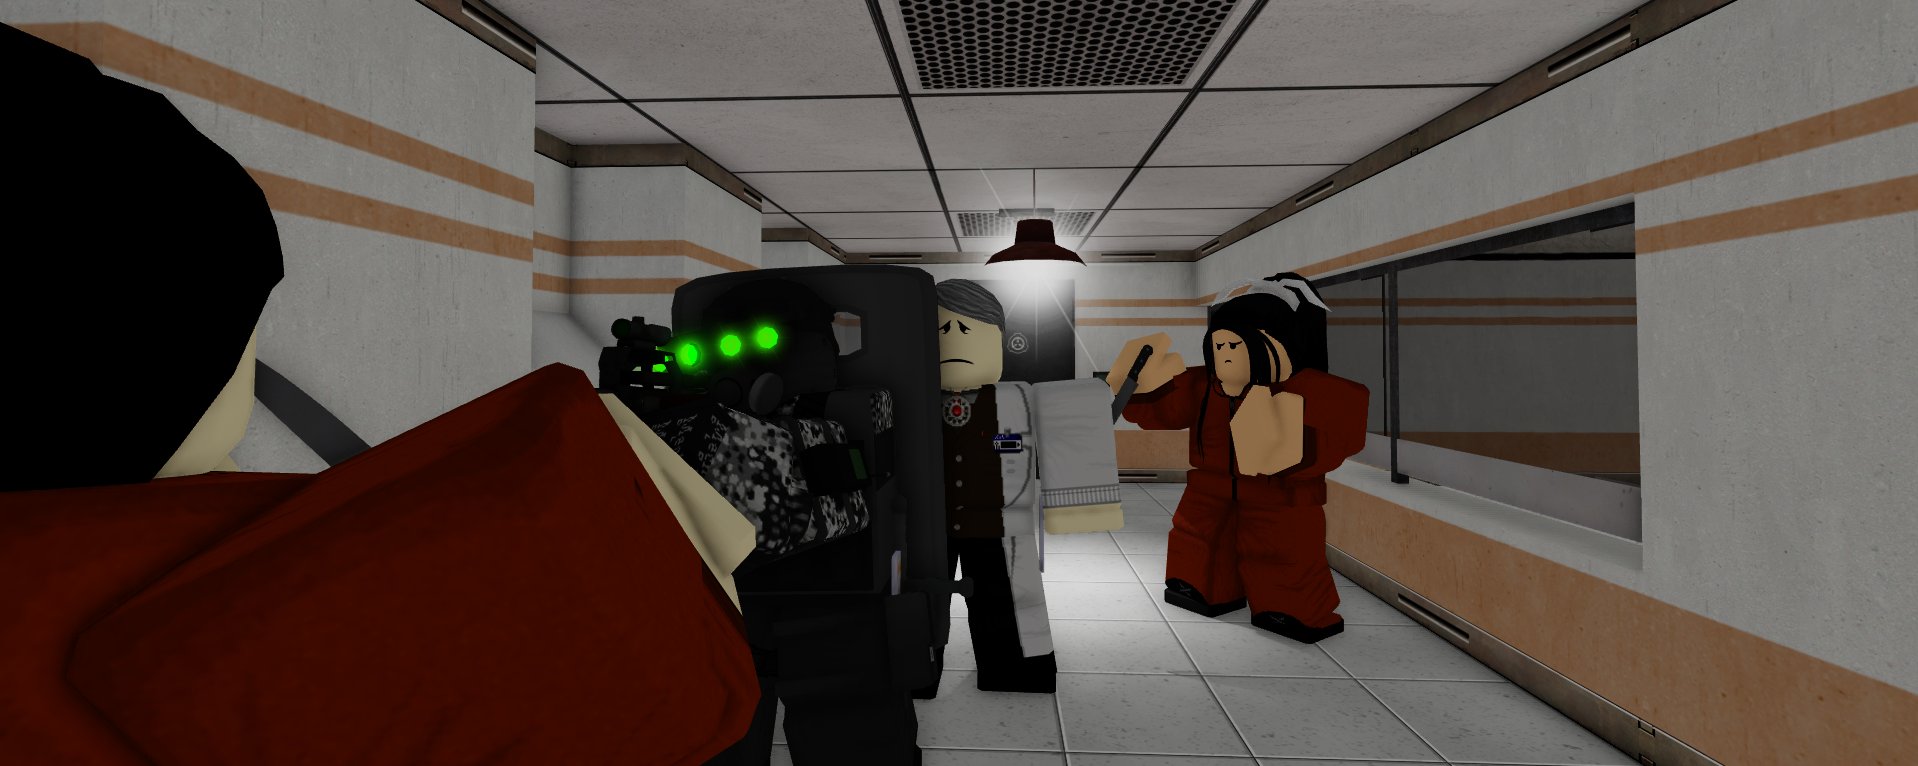 S.C.P. Roleplay ROBLOX